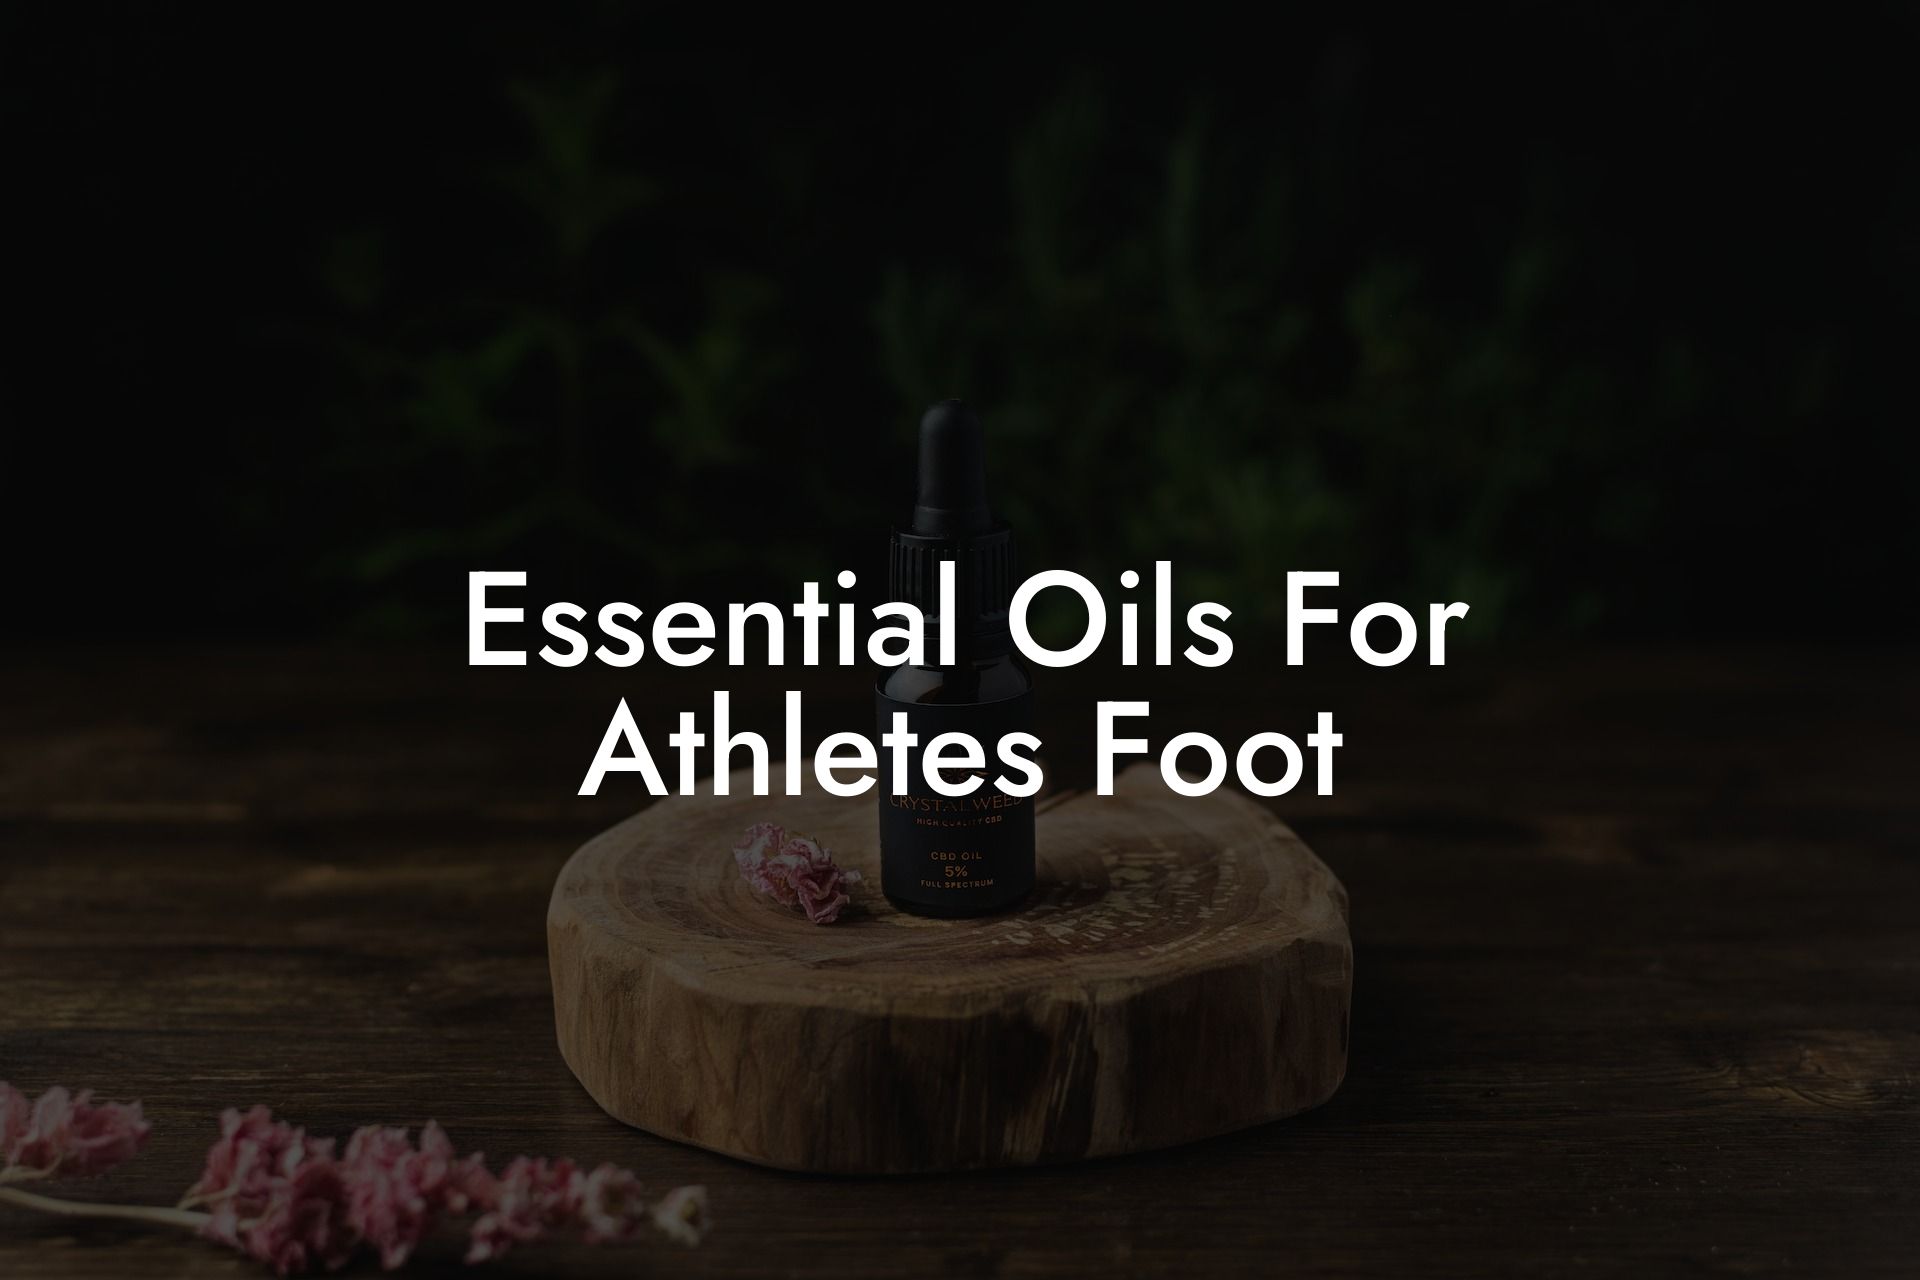 Essential Oils For Athletes Foot